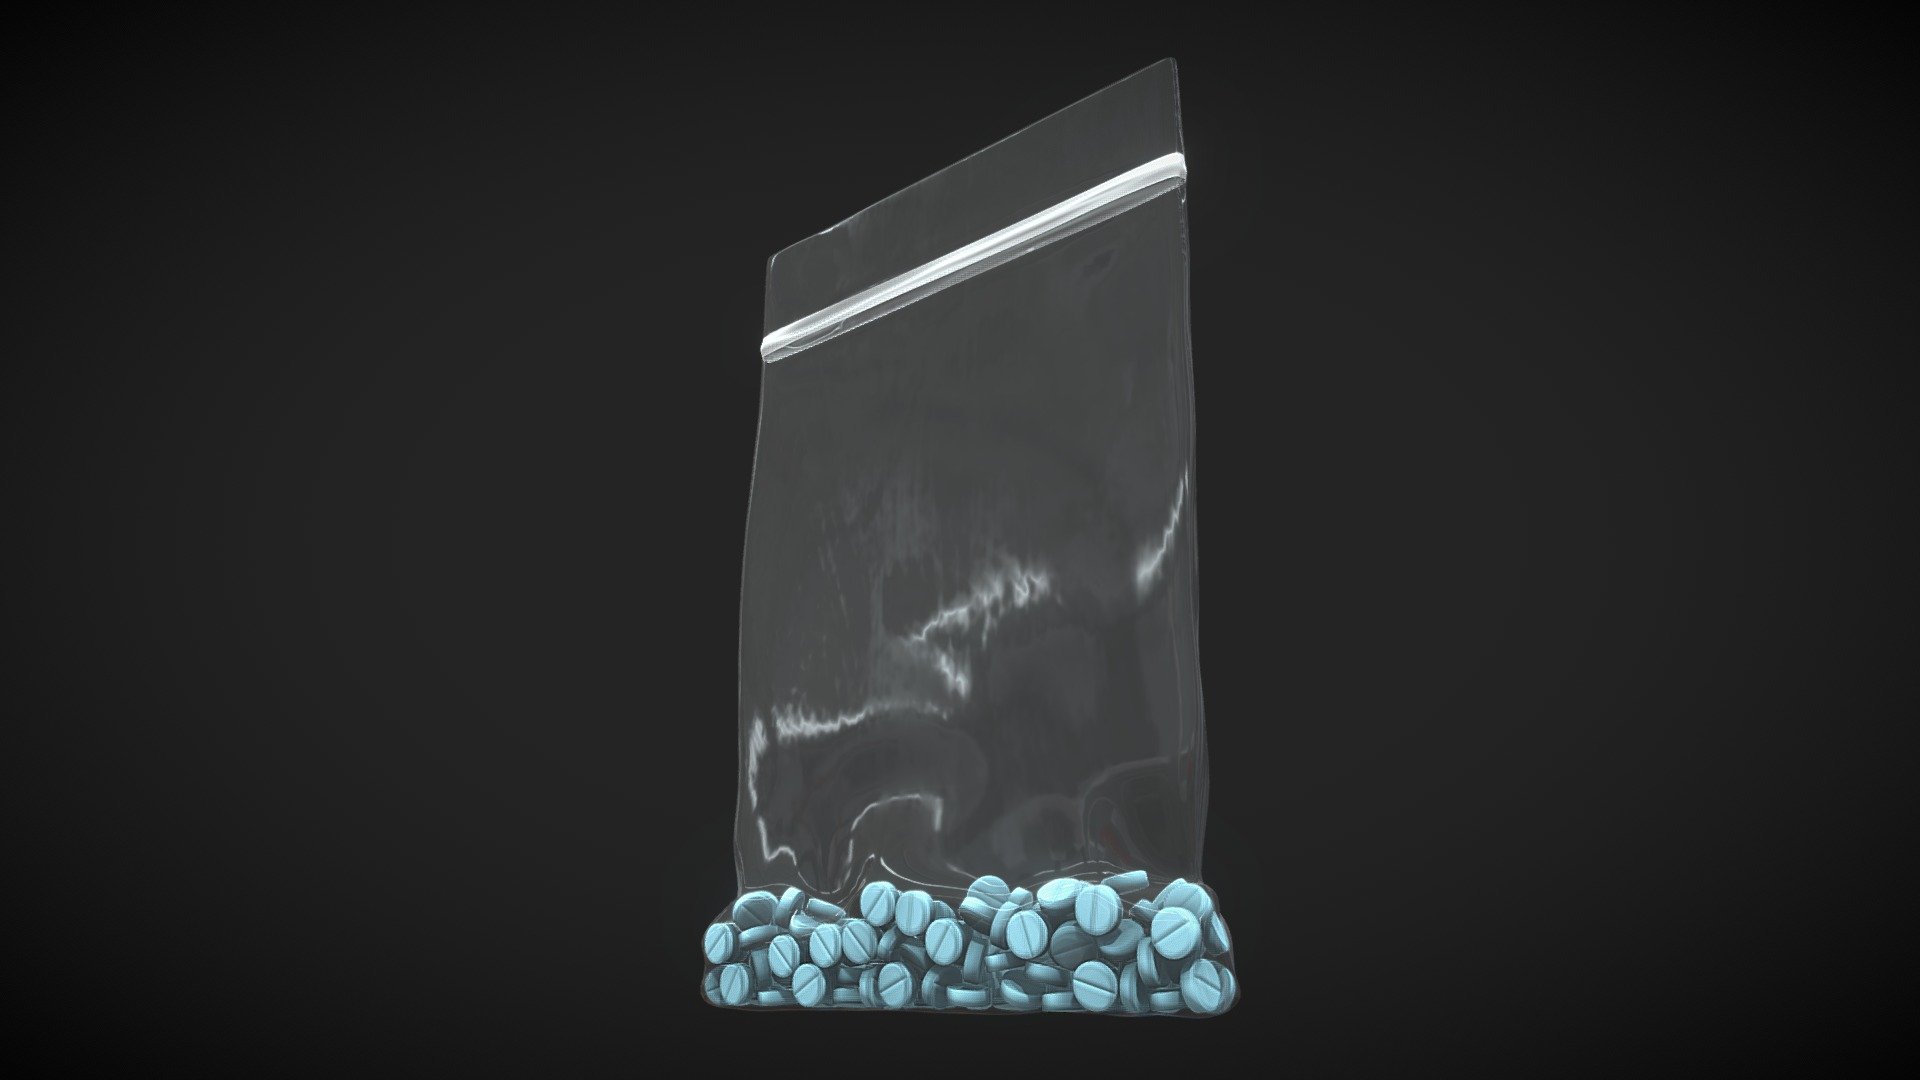 Micro Pellets Drug Bag made in blender, 3 level of details available in the second blend file.

All my models are made with love for you to enjoy 3d model